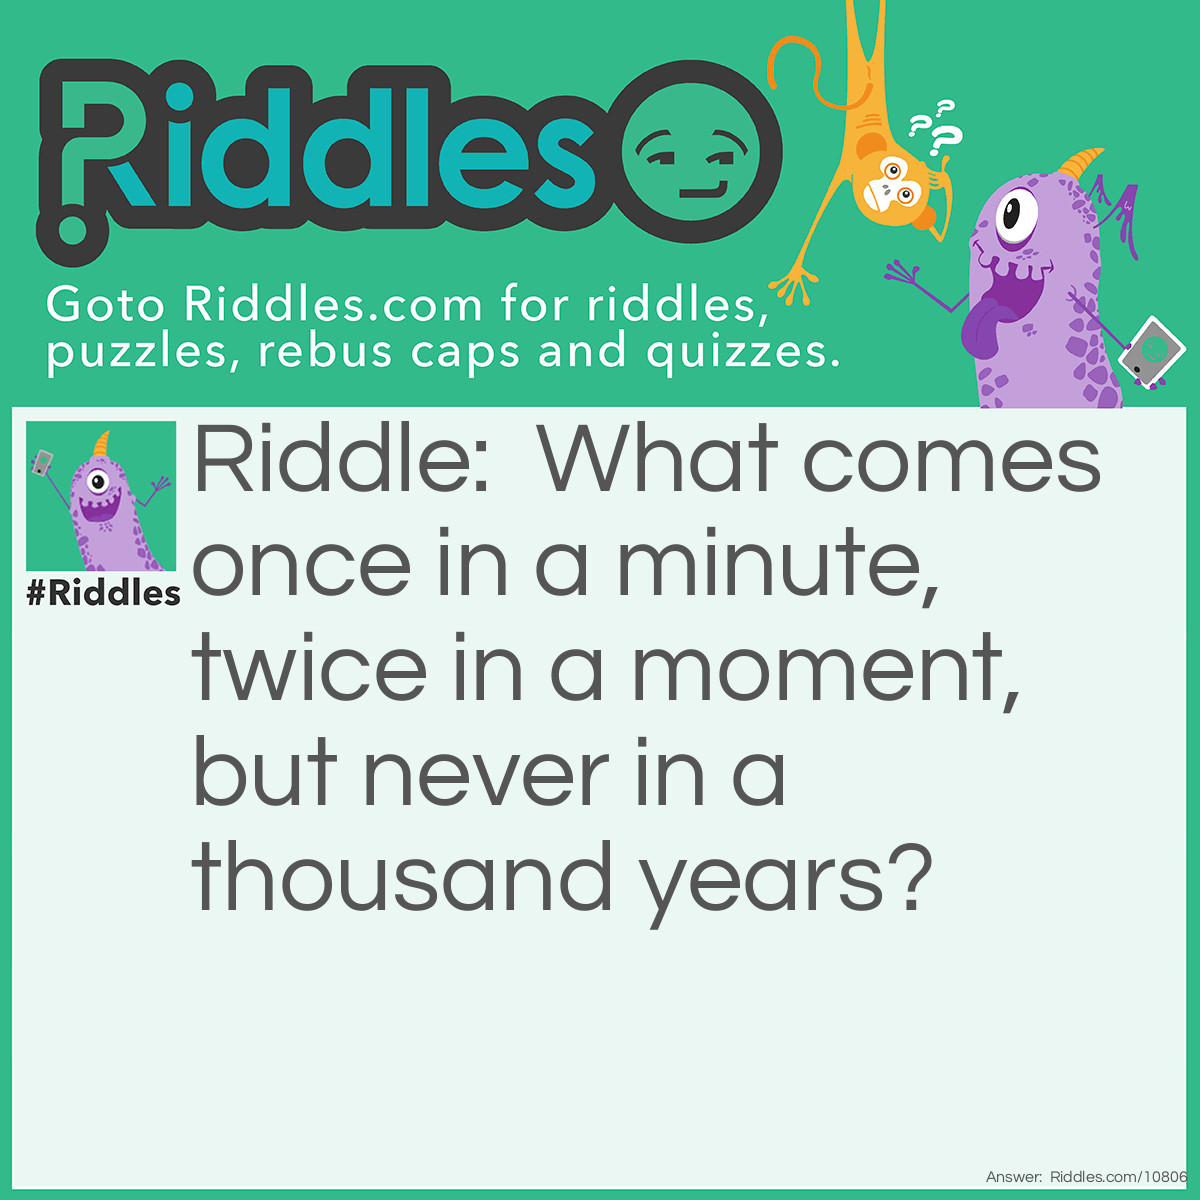 Riddle: What comes once in a minute, twice in a moment, but never in a thousand years? Answer: Letter M.